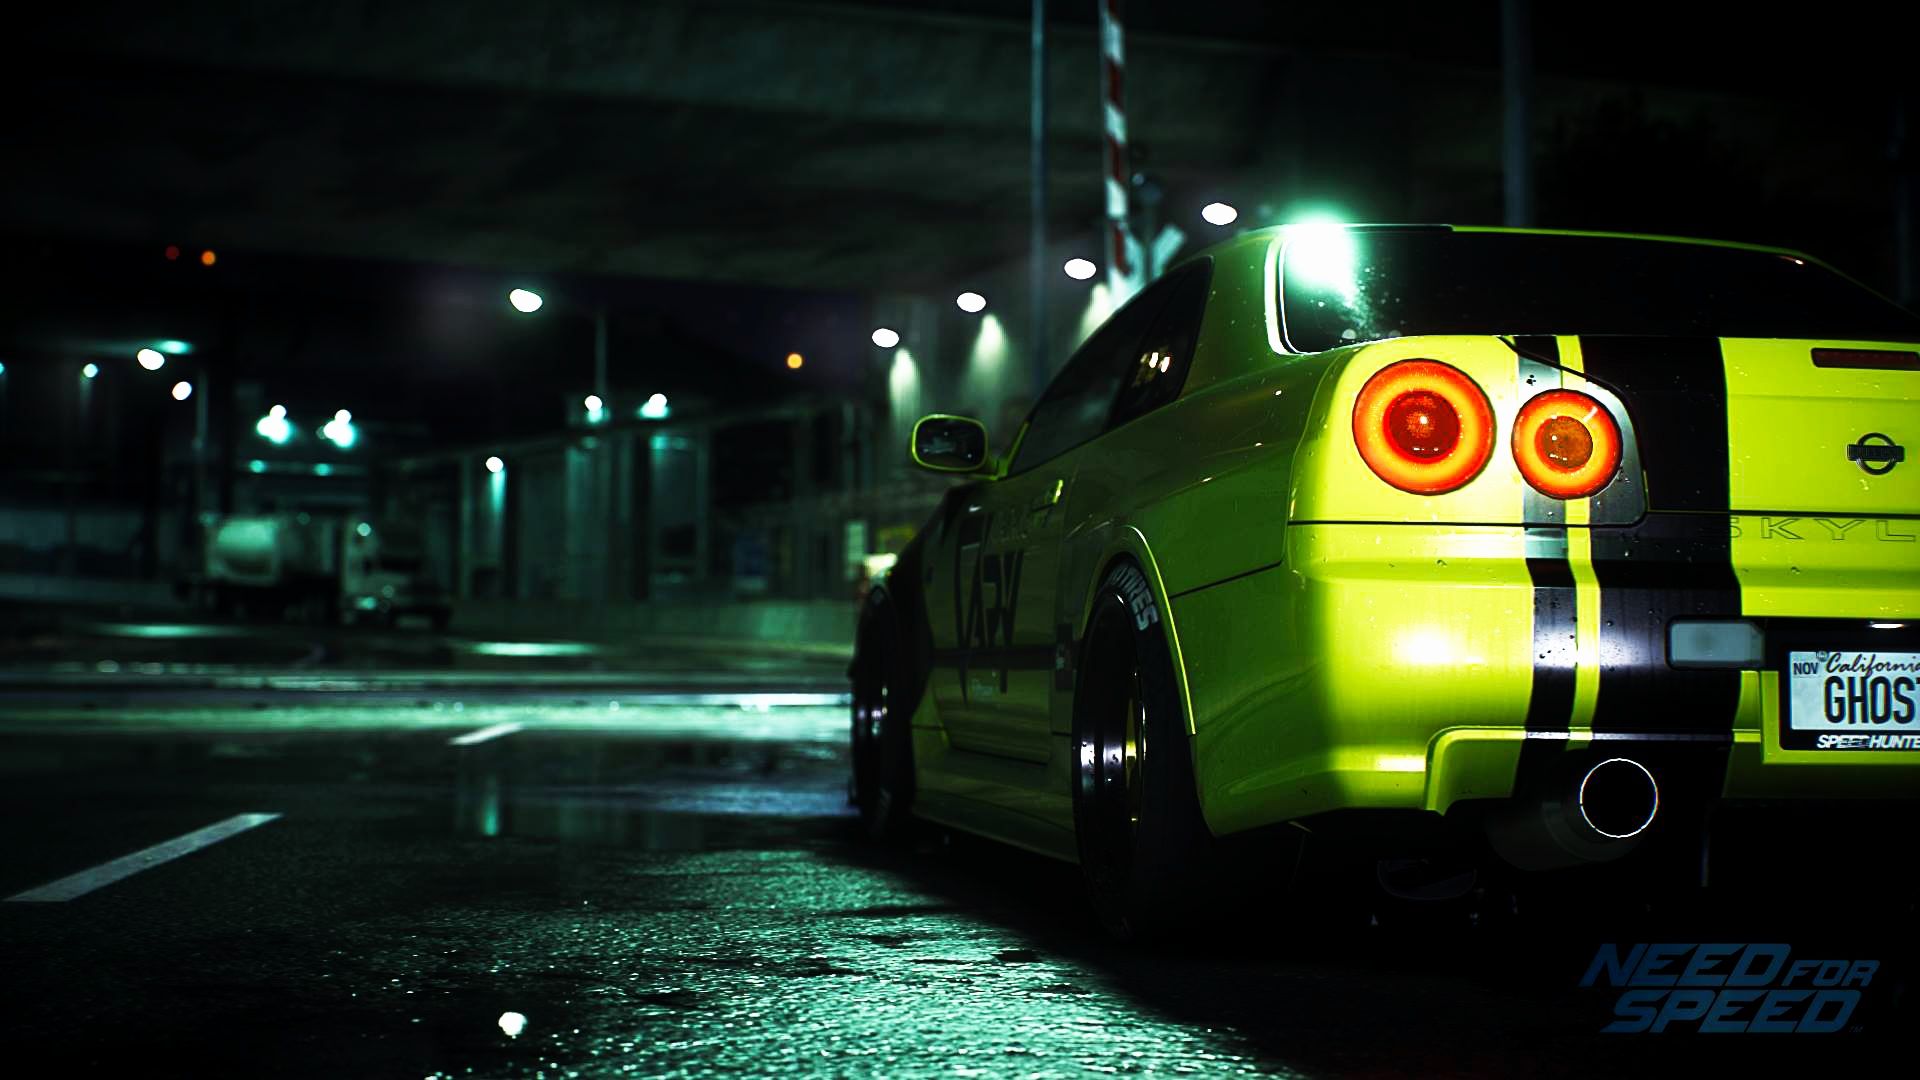 Needforspeed Wallpaper Fresh Need for Speed 2015 Wallpaper This Year of The Hudson